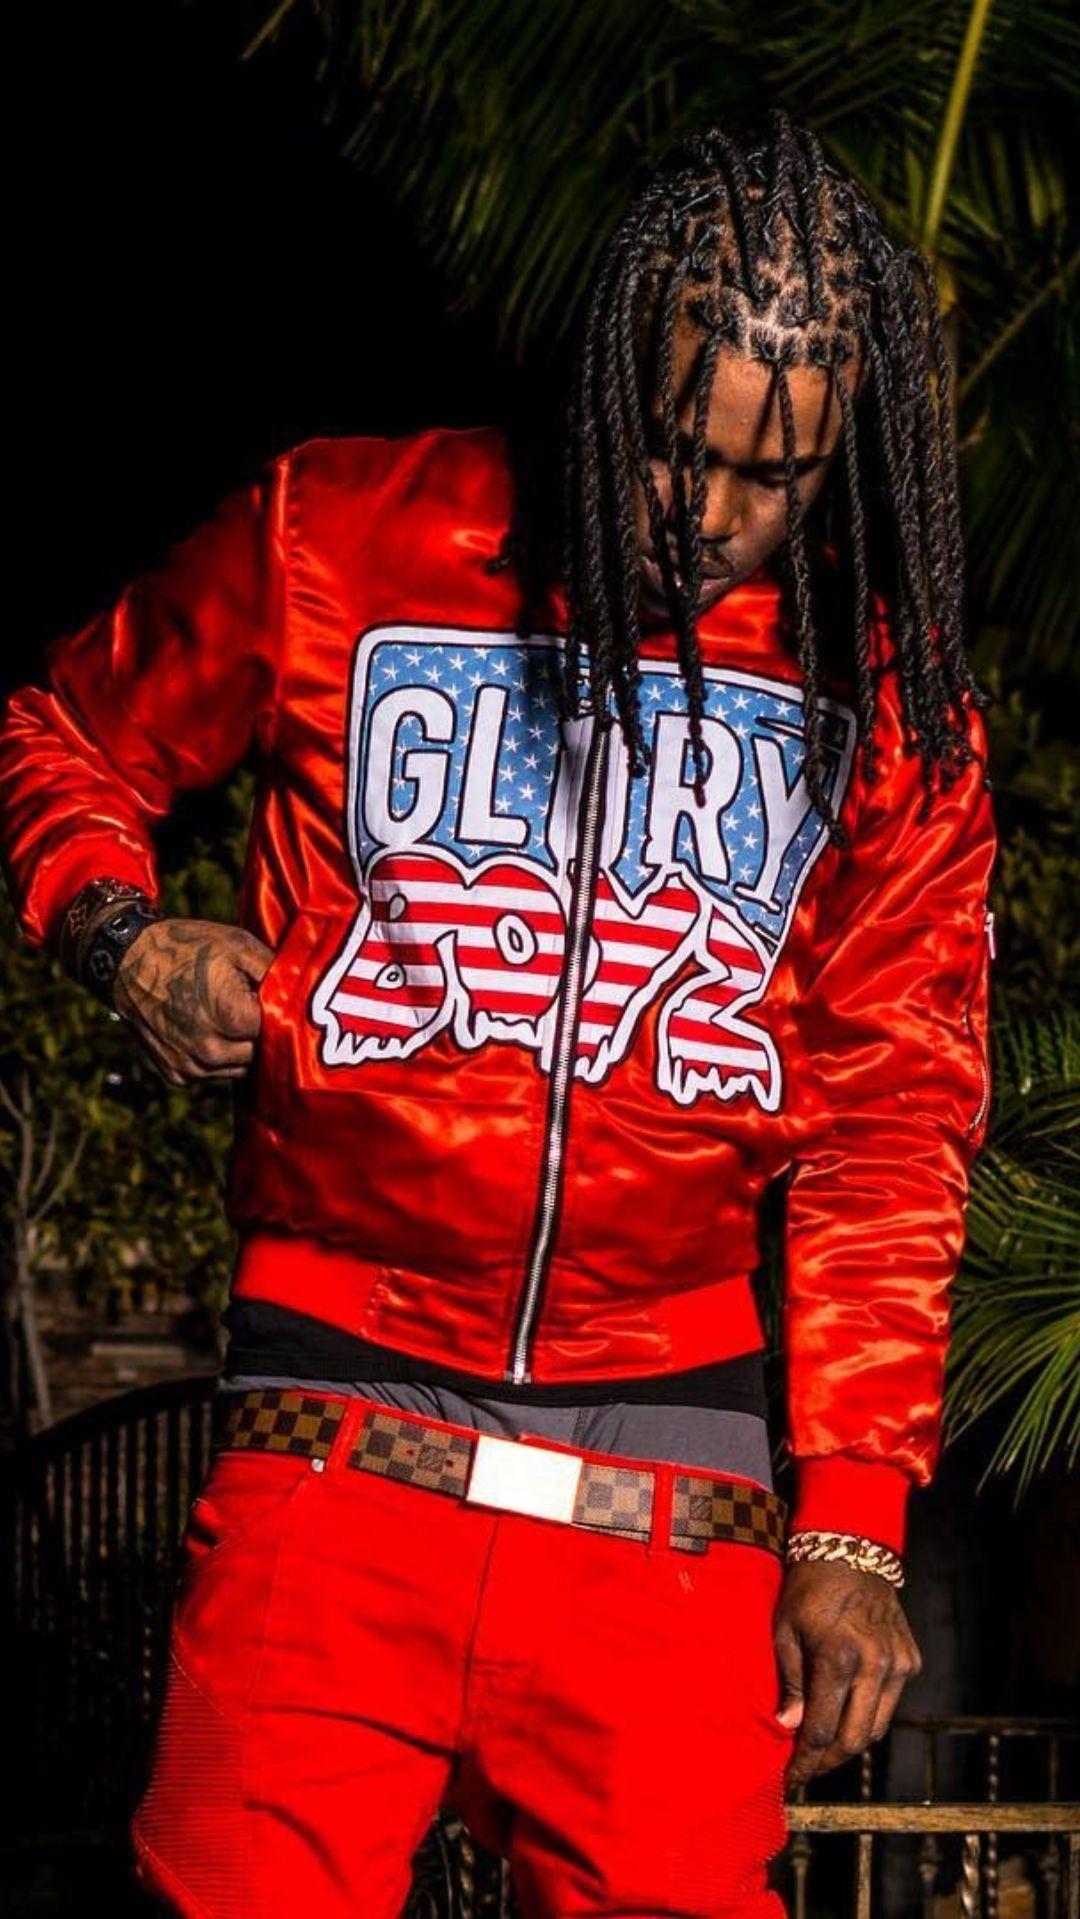 Chief Keef Wallpapers Top Best Chief Keef Wallpapers HQ